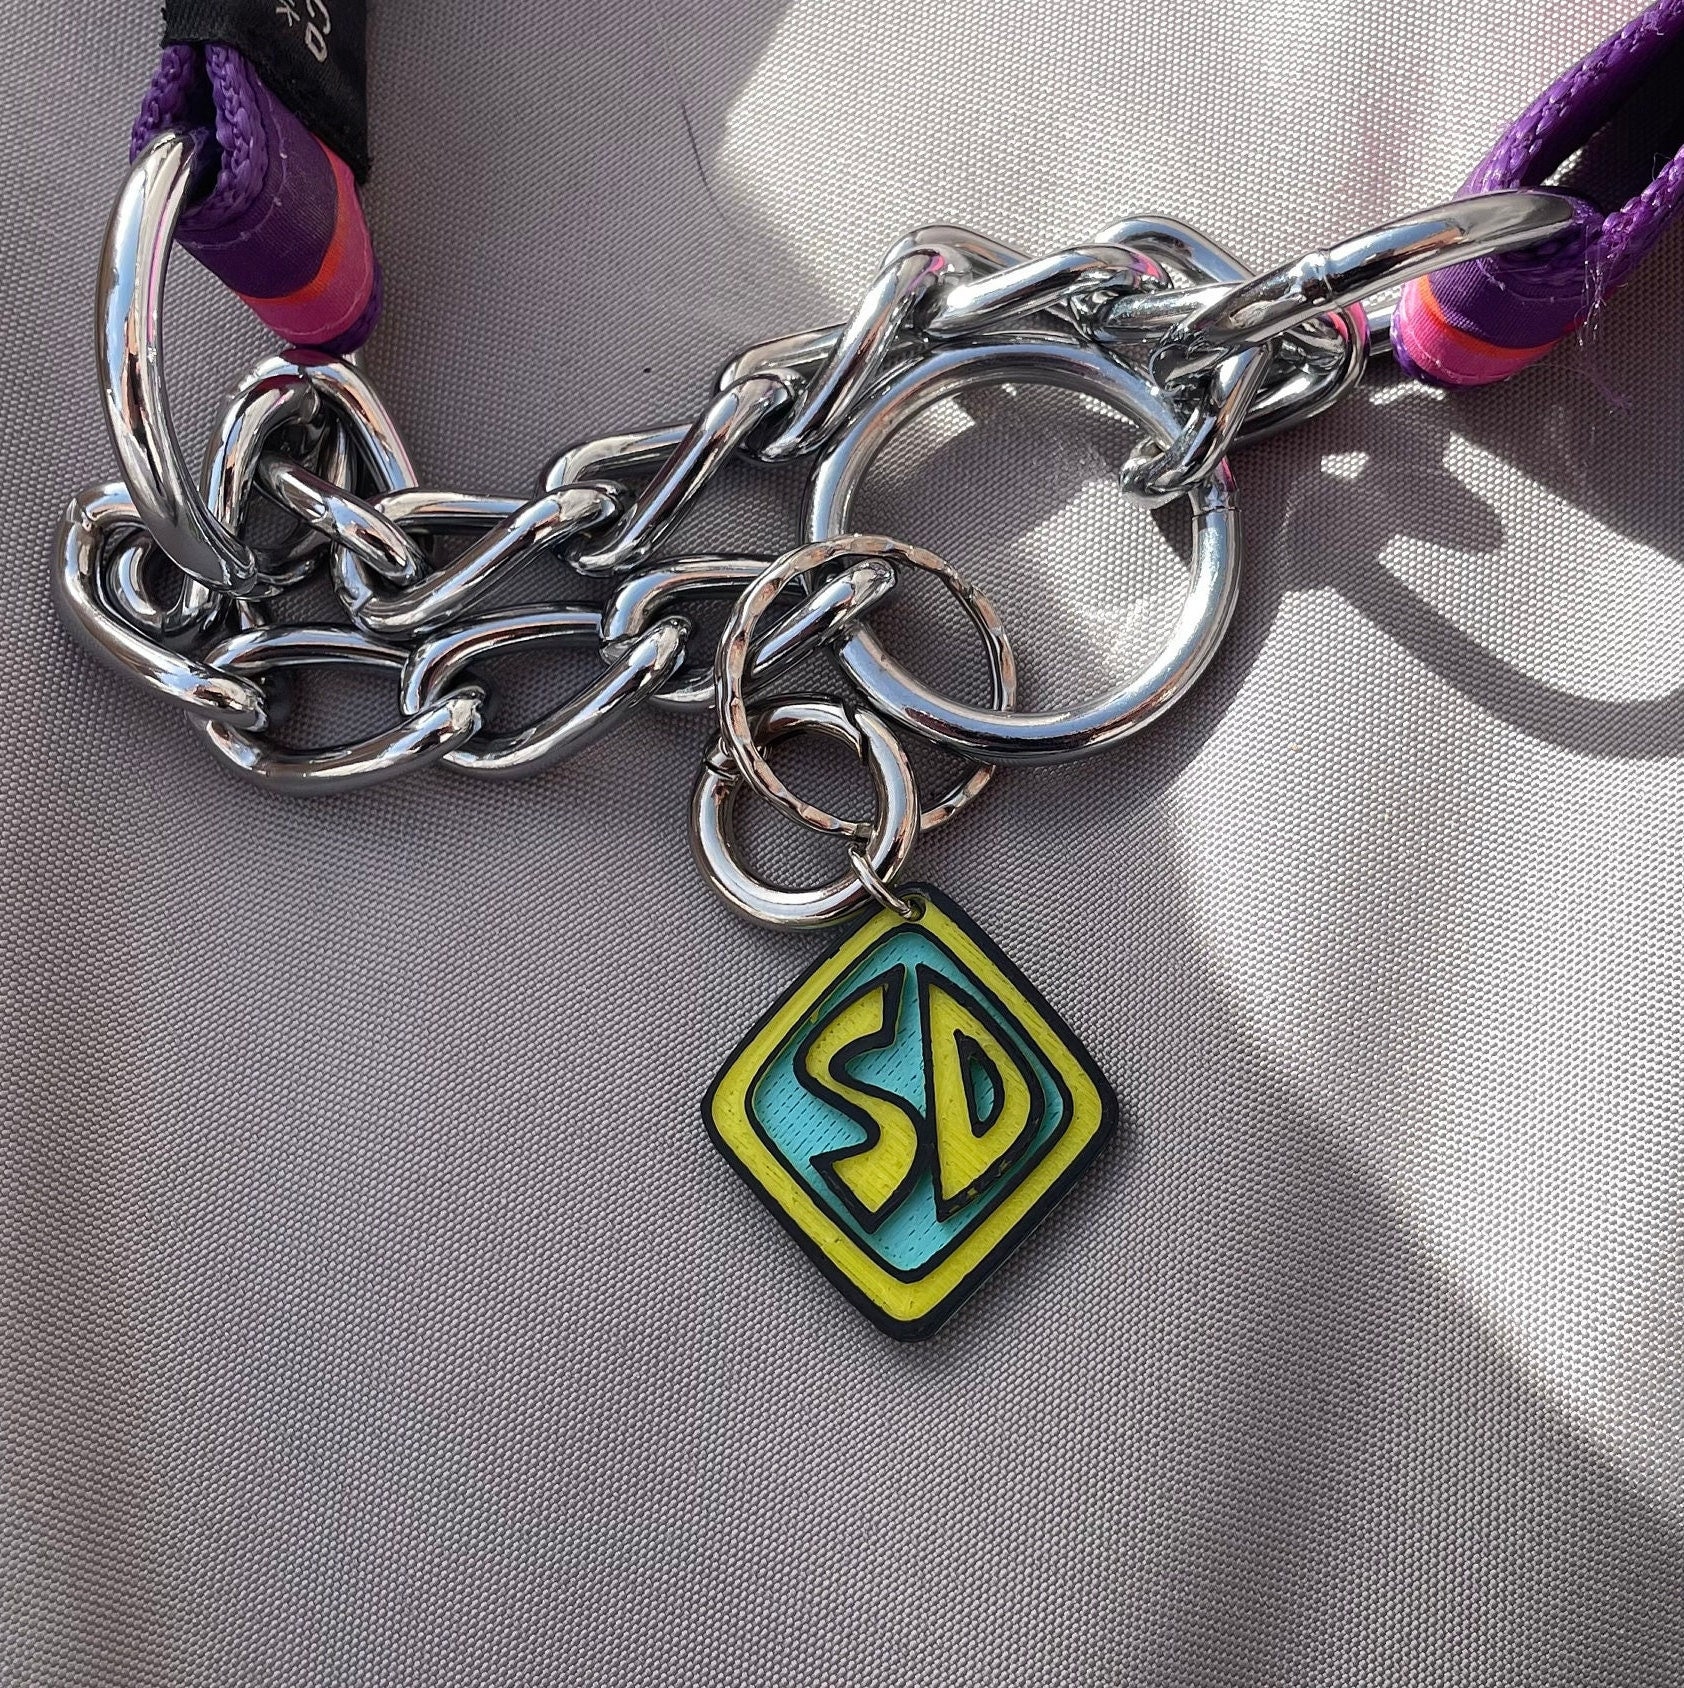 Dog Collar Tag / Charm Styled Like the Tag Worn by Scooby Doo 